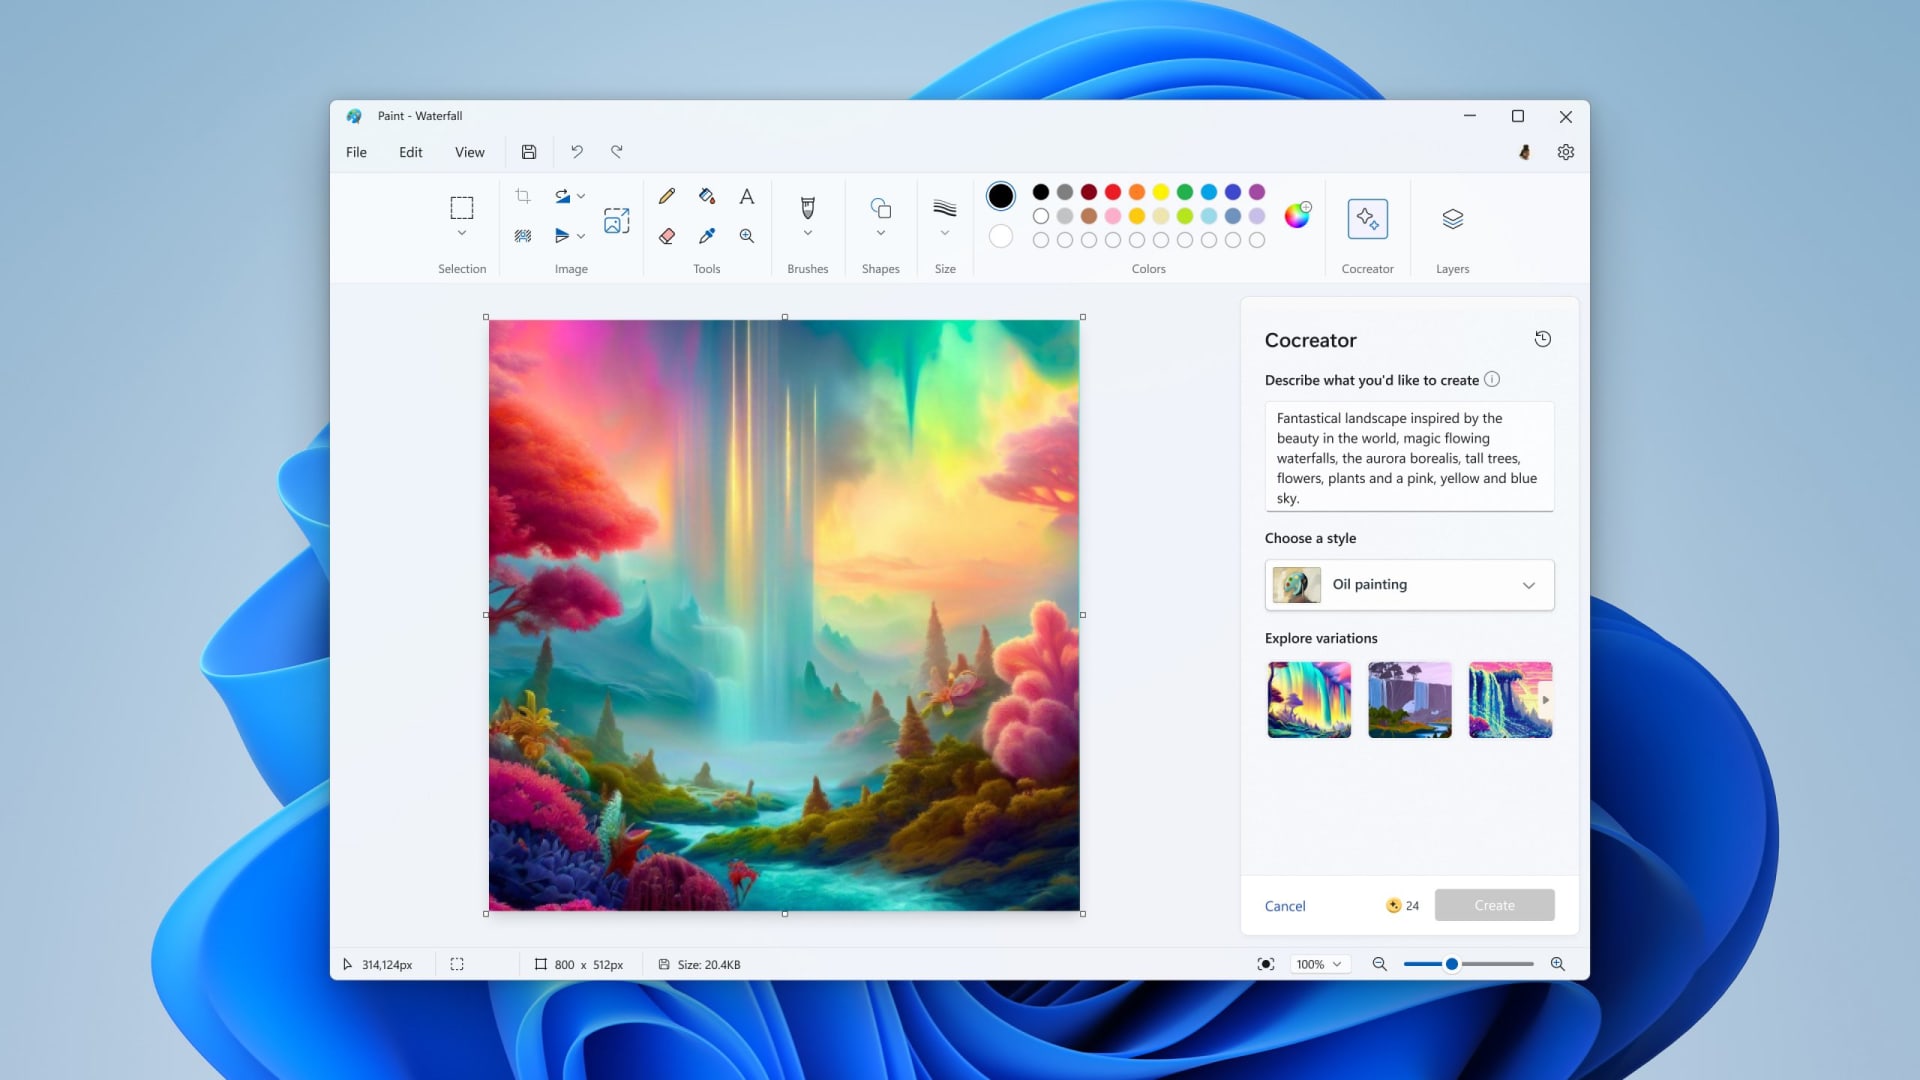 Microsoft's updated Paint app for Windows 11 will allow people to create images by just typing in a few words.